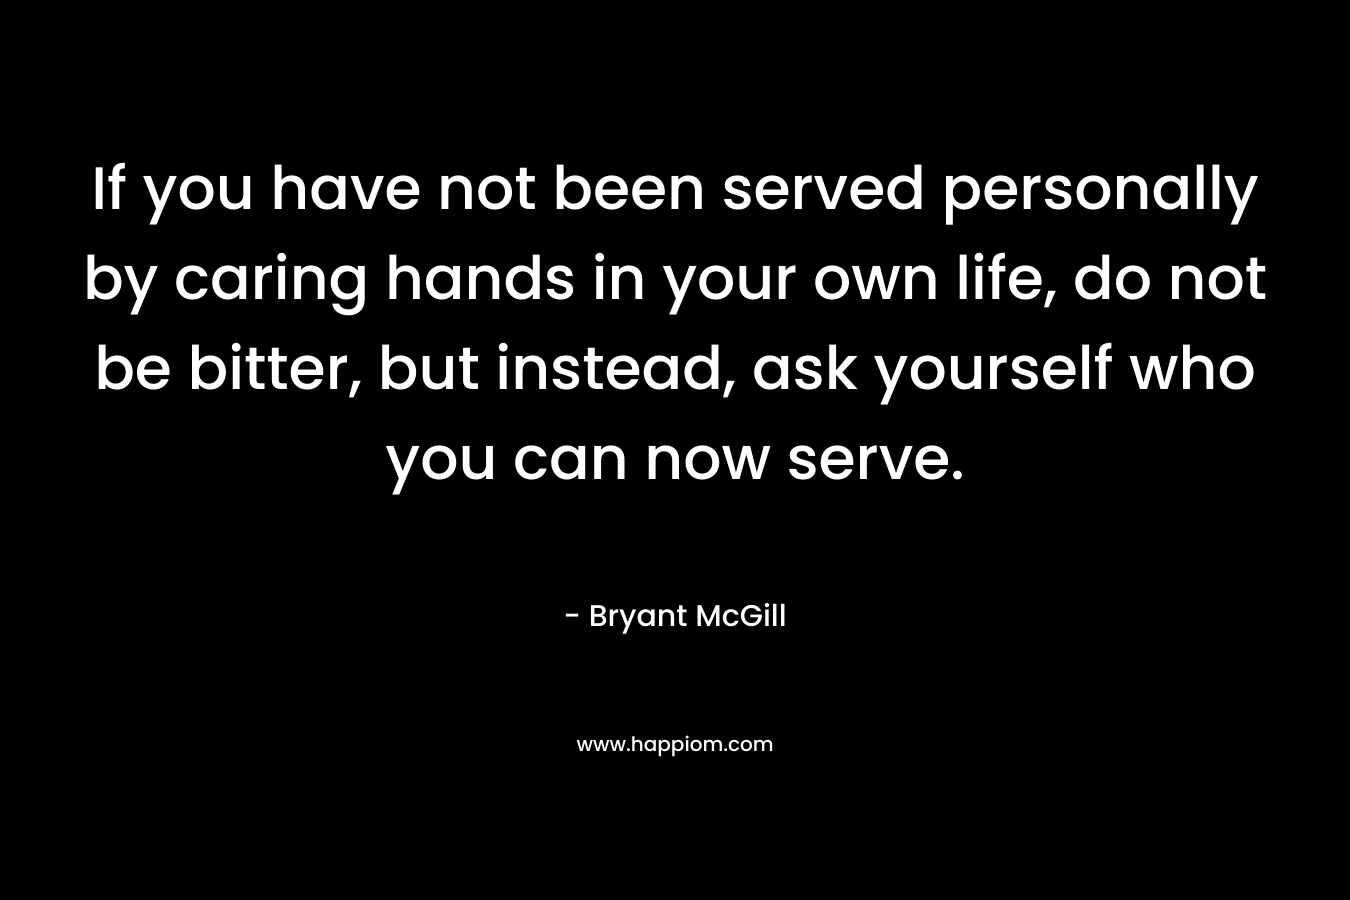 If you have not been served personally by caring hands in your own life, do not be bitter, but instead, ask yourself who you can now serve.